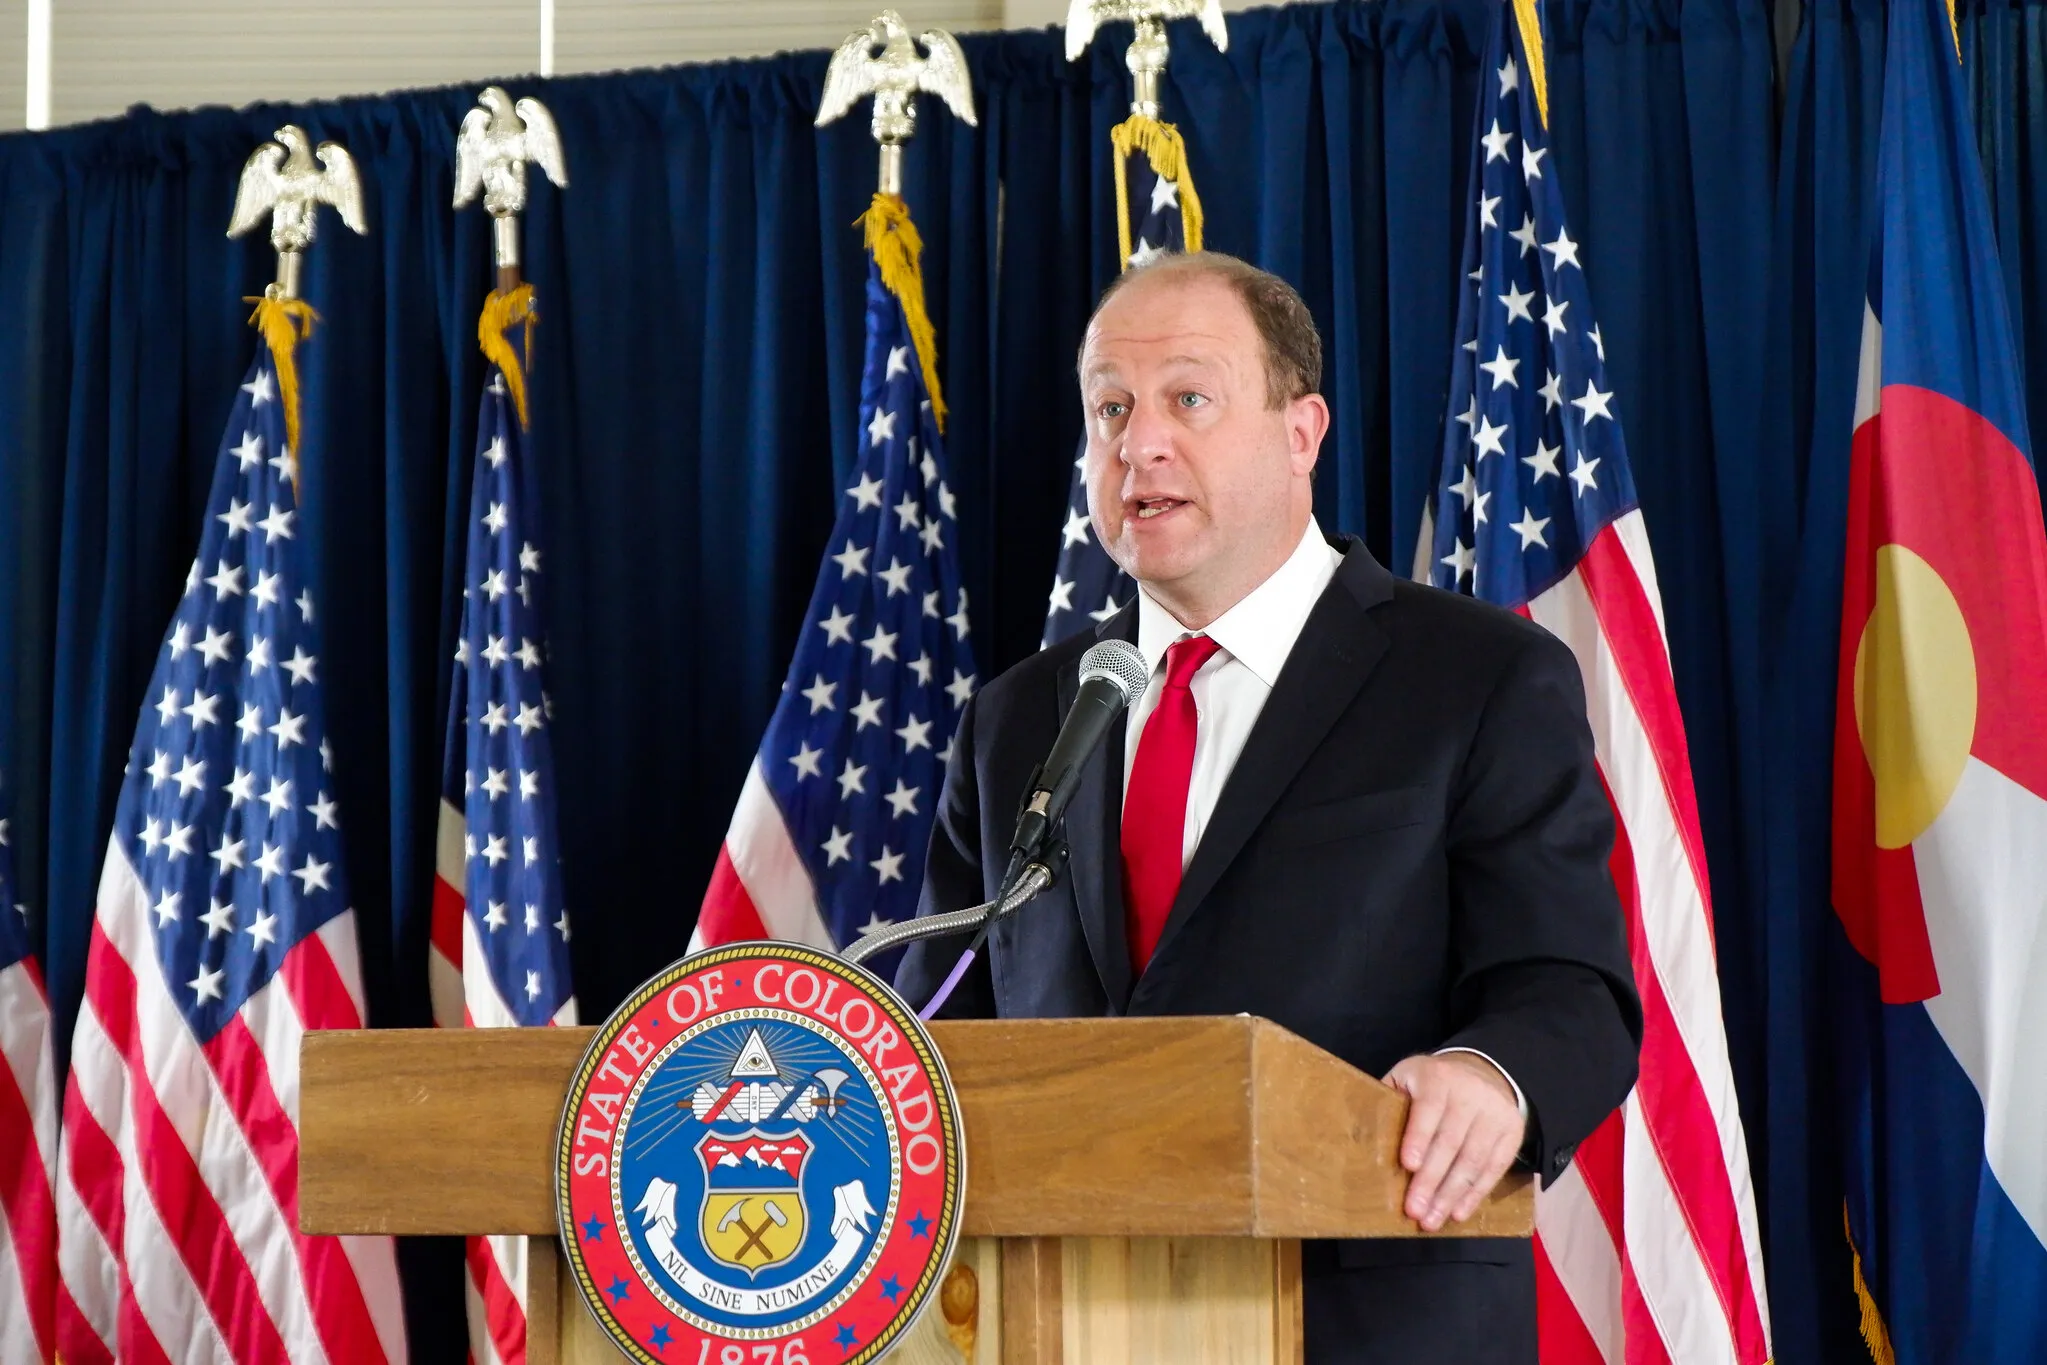 Colorado governor Jared Polis speaks at a press conference, June 11, 2020.?w=200&h=150